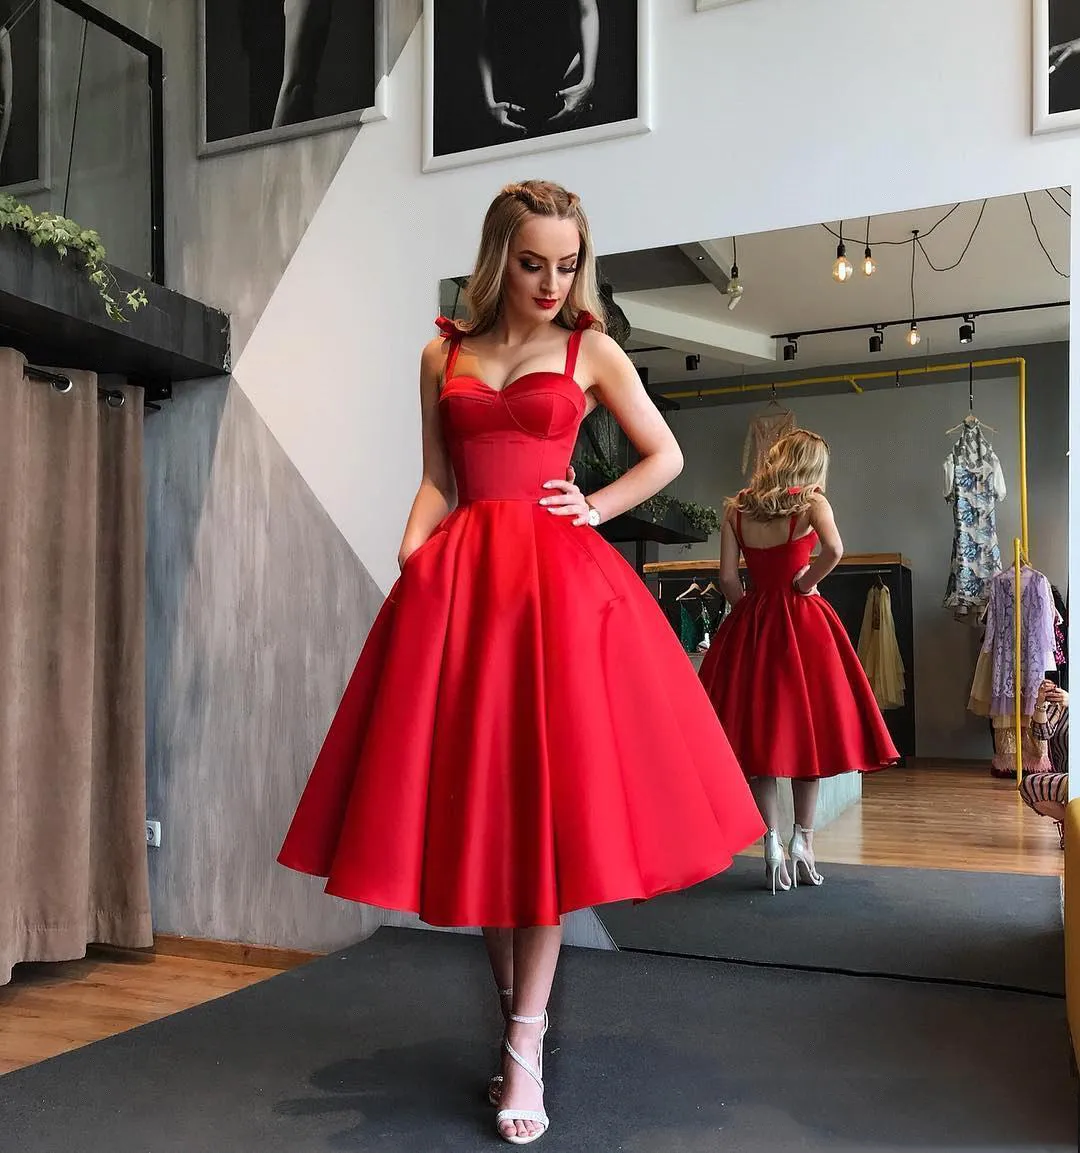 2018 Simple Elegant Red Homecoming Dresses Spaghetti Sleeveless A-Line Prom Gowns Back Zipper Lovely Custom Made Mid-Calf Cocktail Gowns